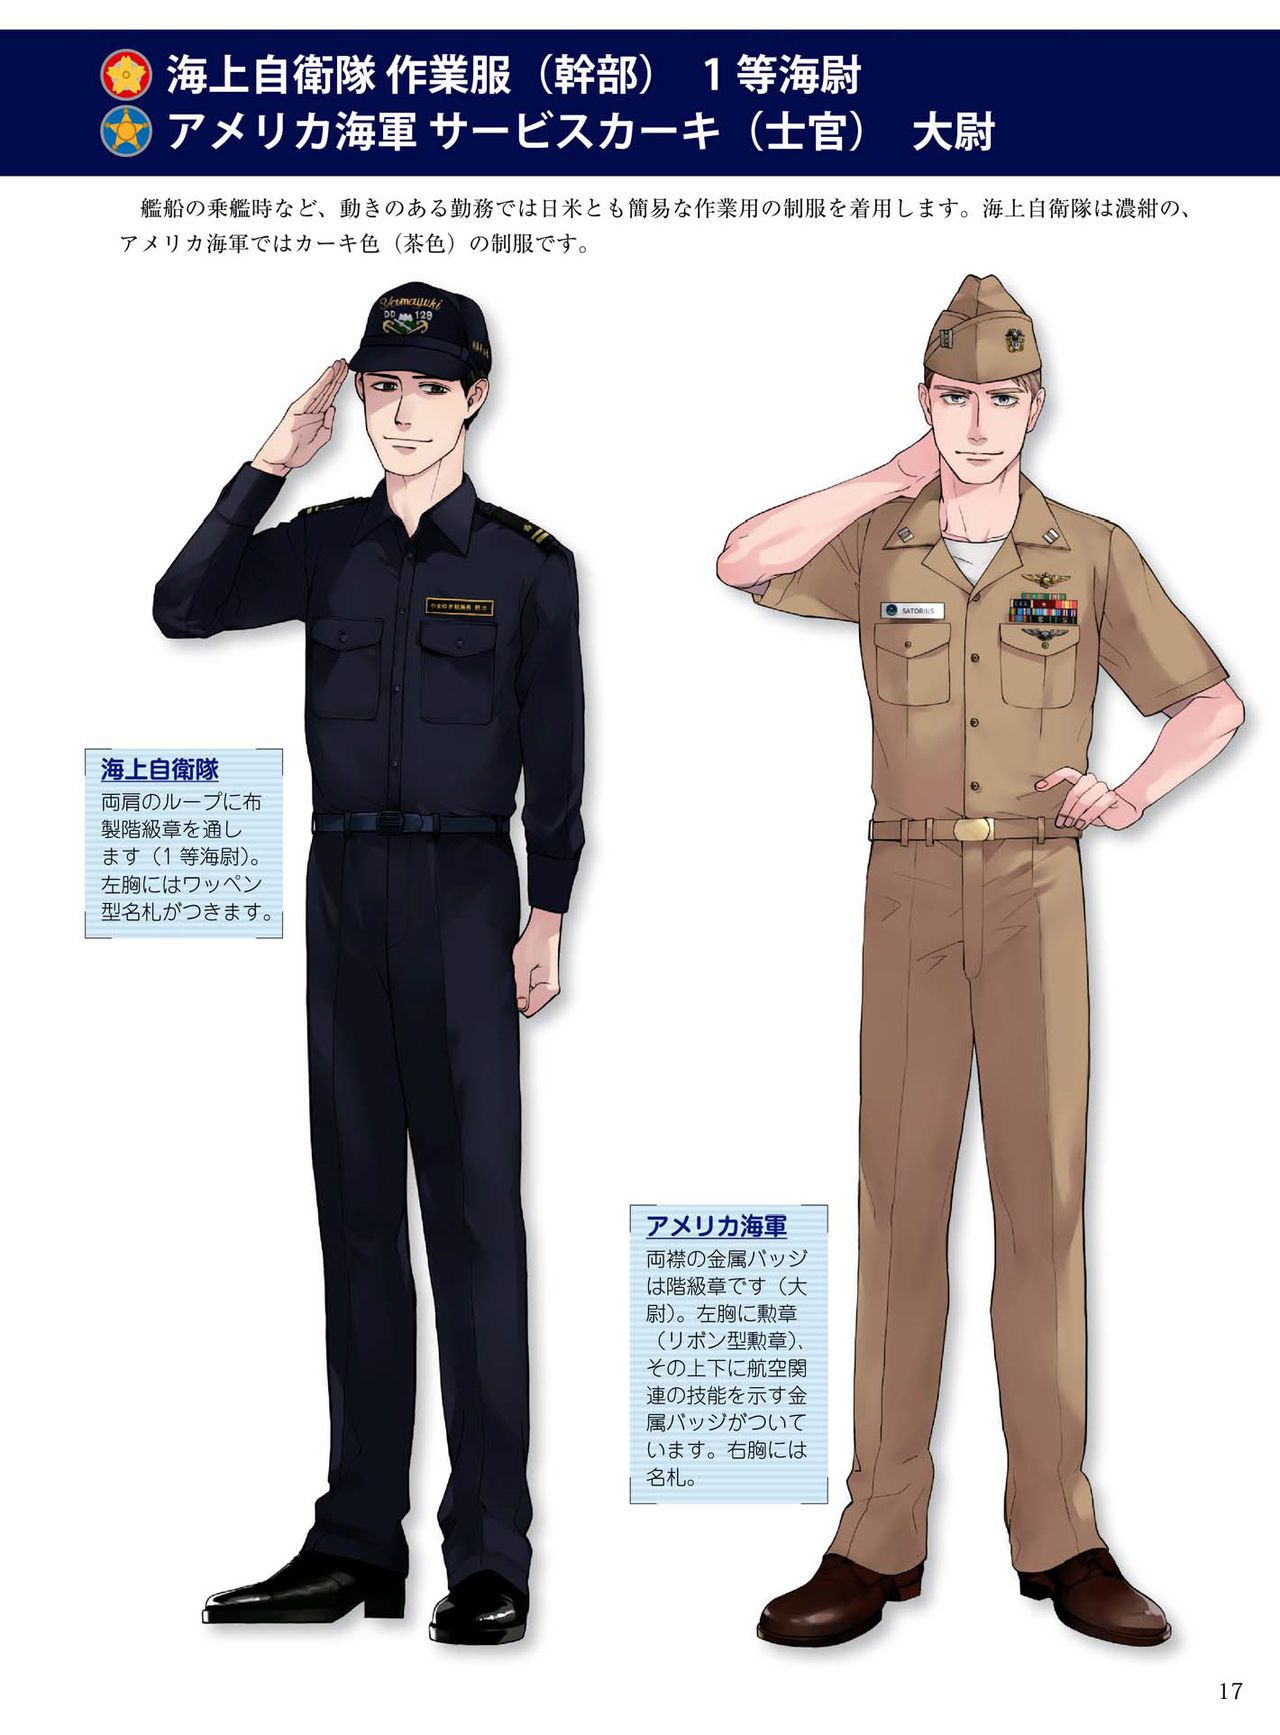 How to draw military uniforms and uniforms From Self-Defense Forces 軍服・制服の描き方 アメリカ軍・自衛隊の制服から戦闘服まで 20